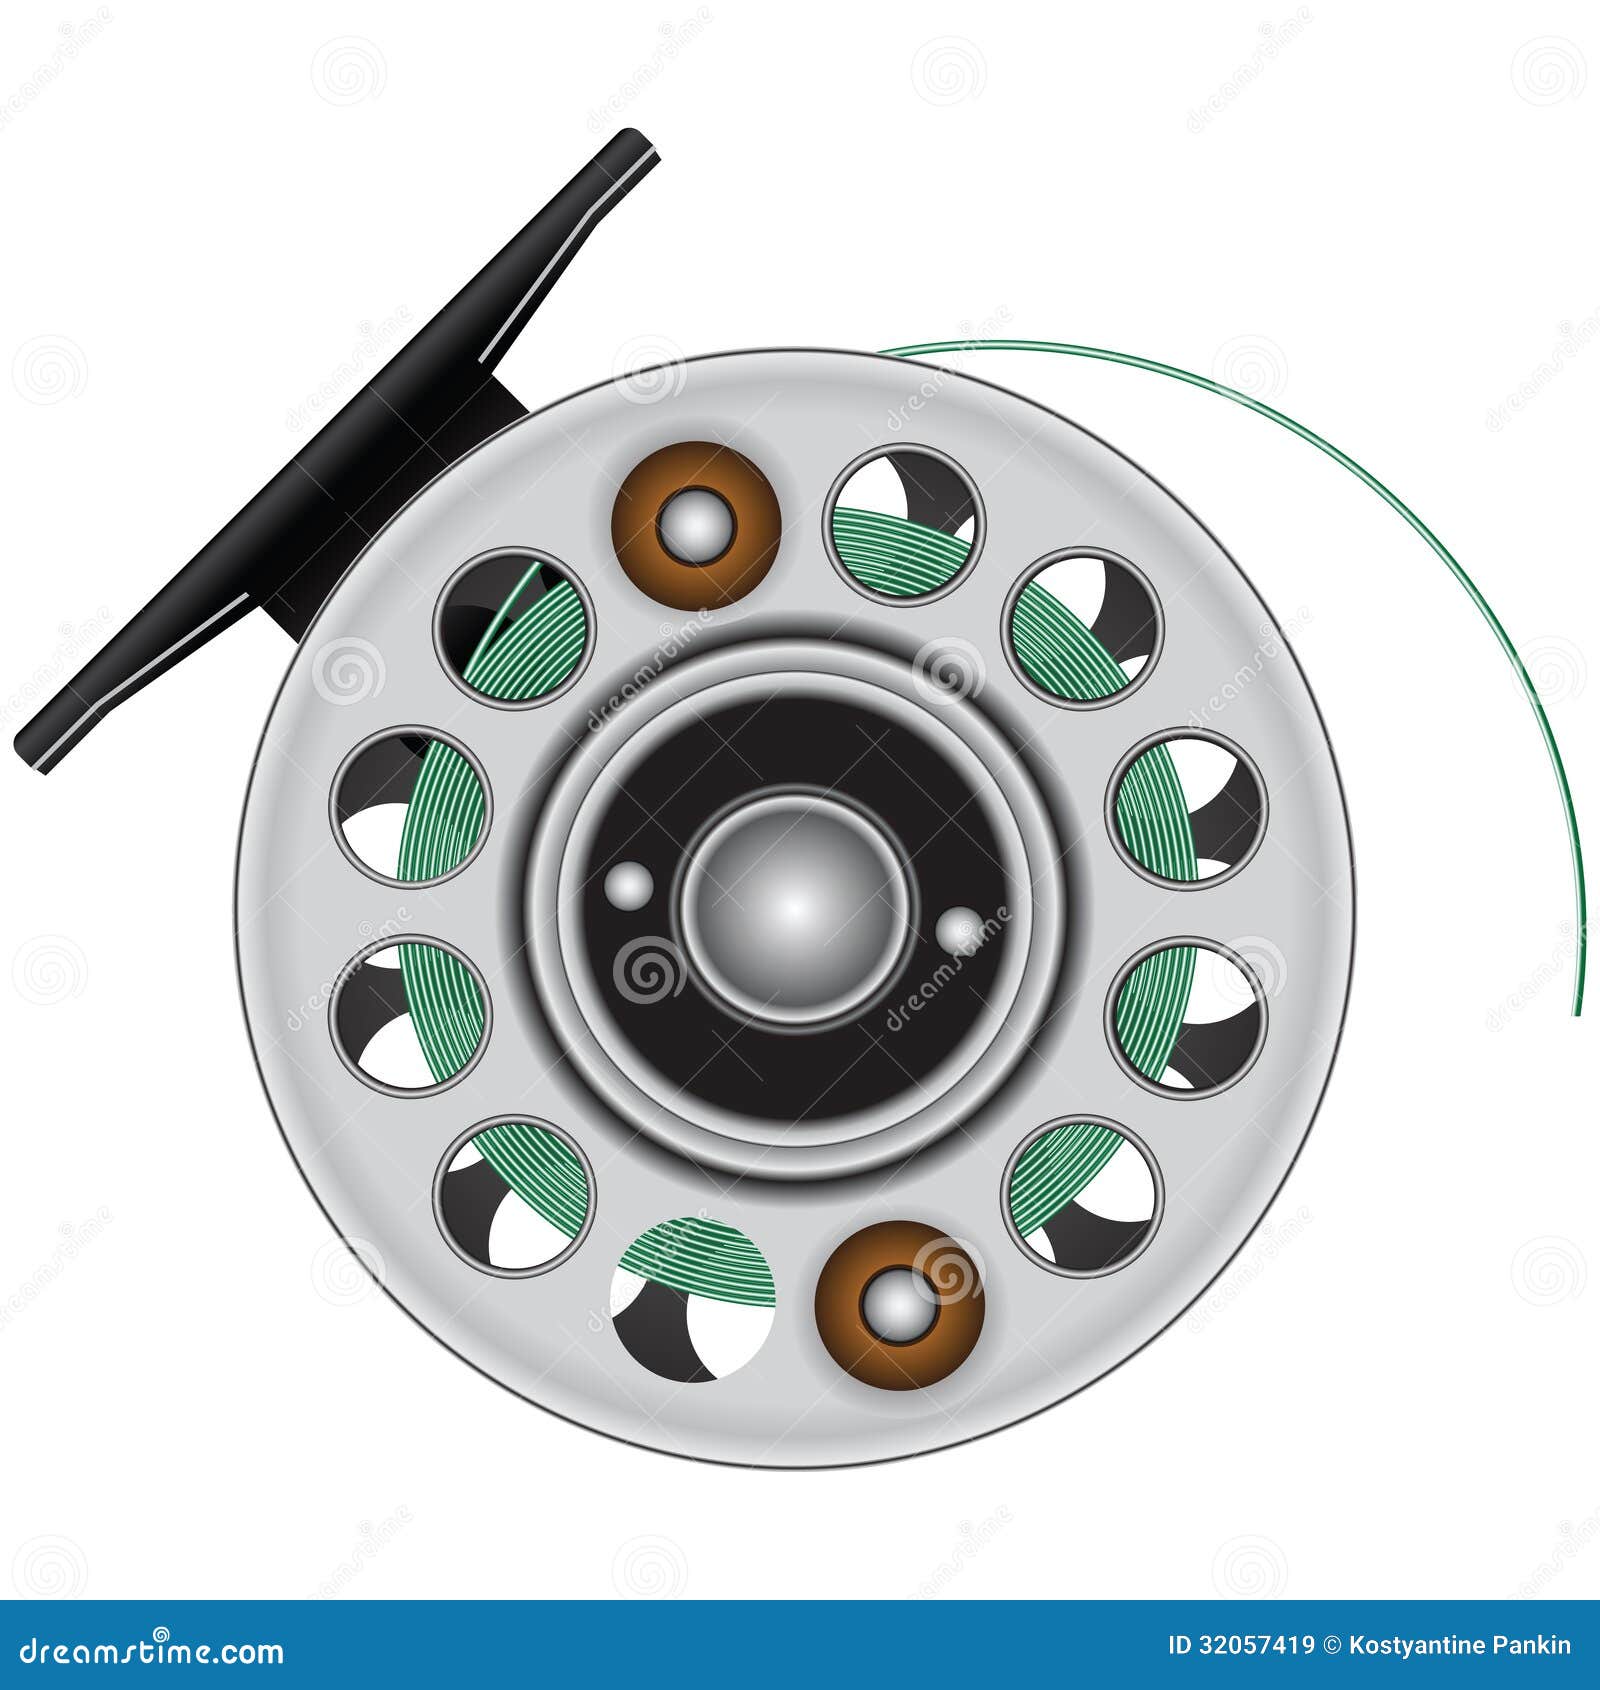 Going Fishing - Fly Fishing - Fly Reels Inventory